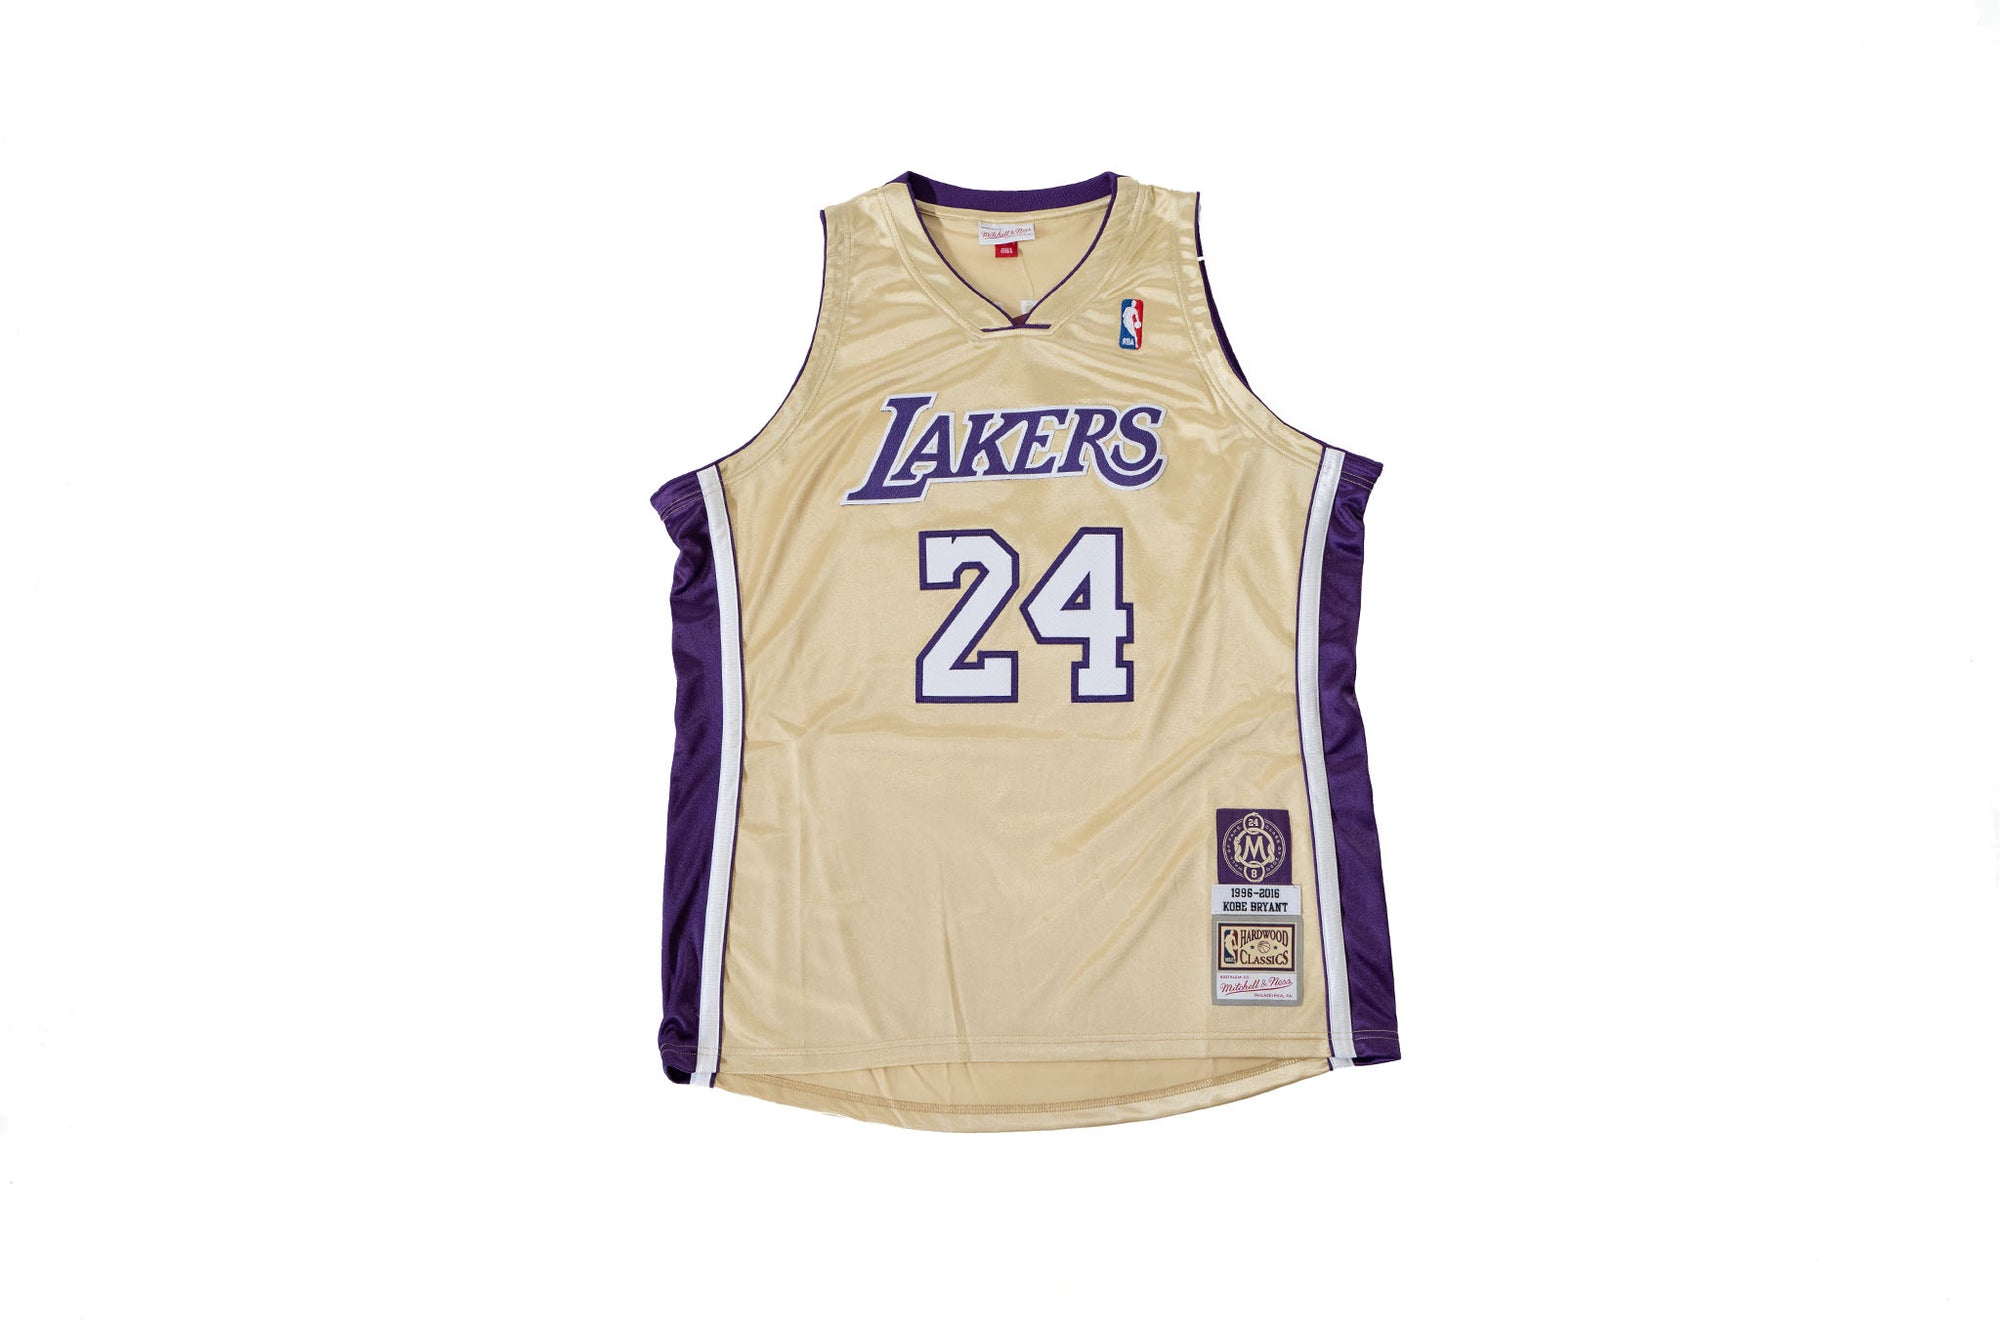 Authentic 1996-2016 Hall Of Fame Kobe Bryant Los Angeles Lakers